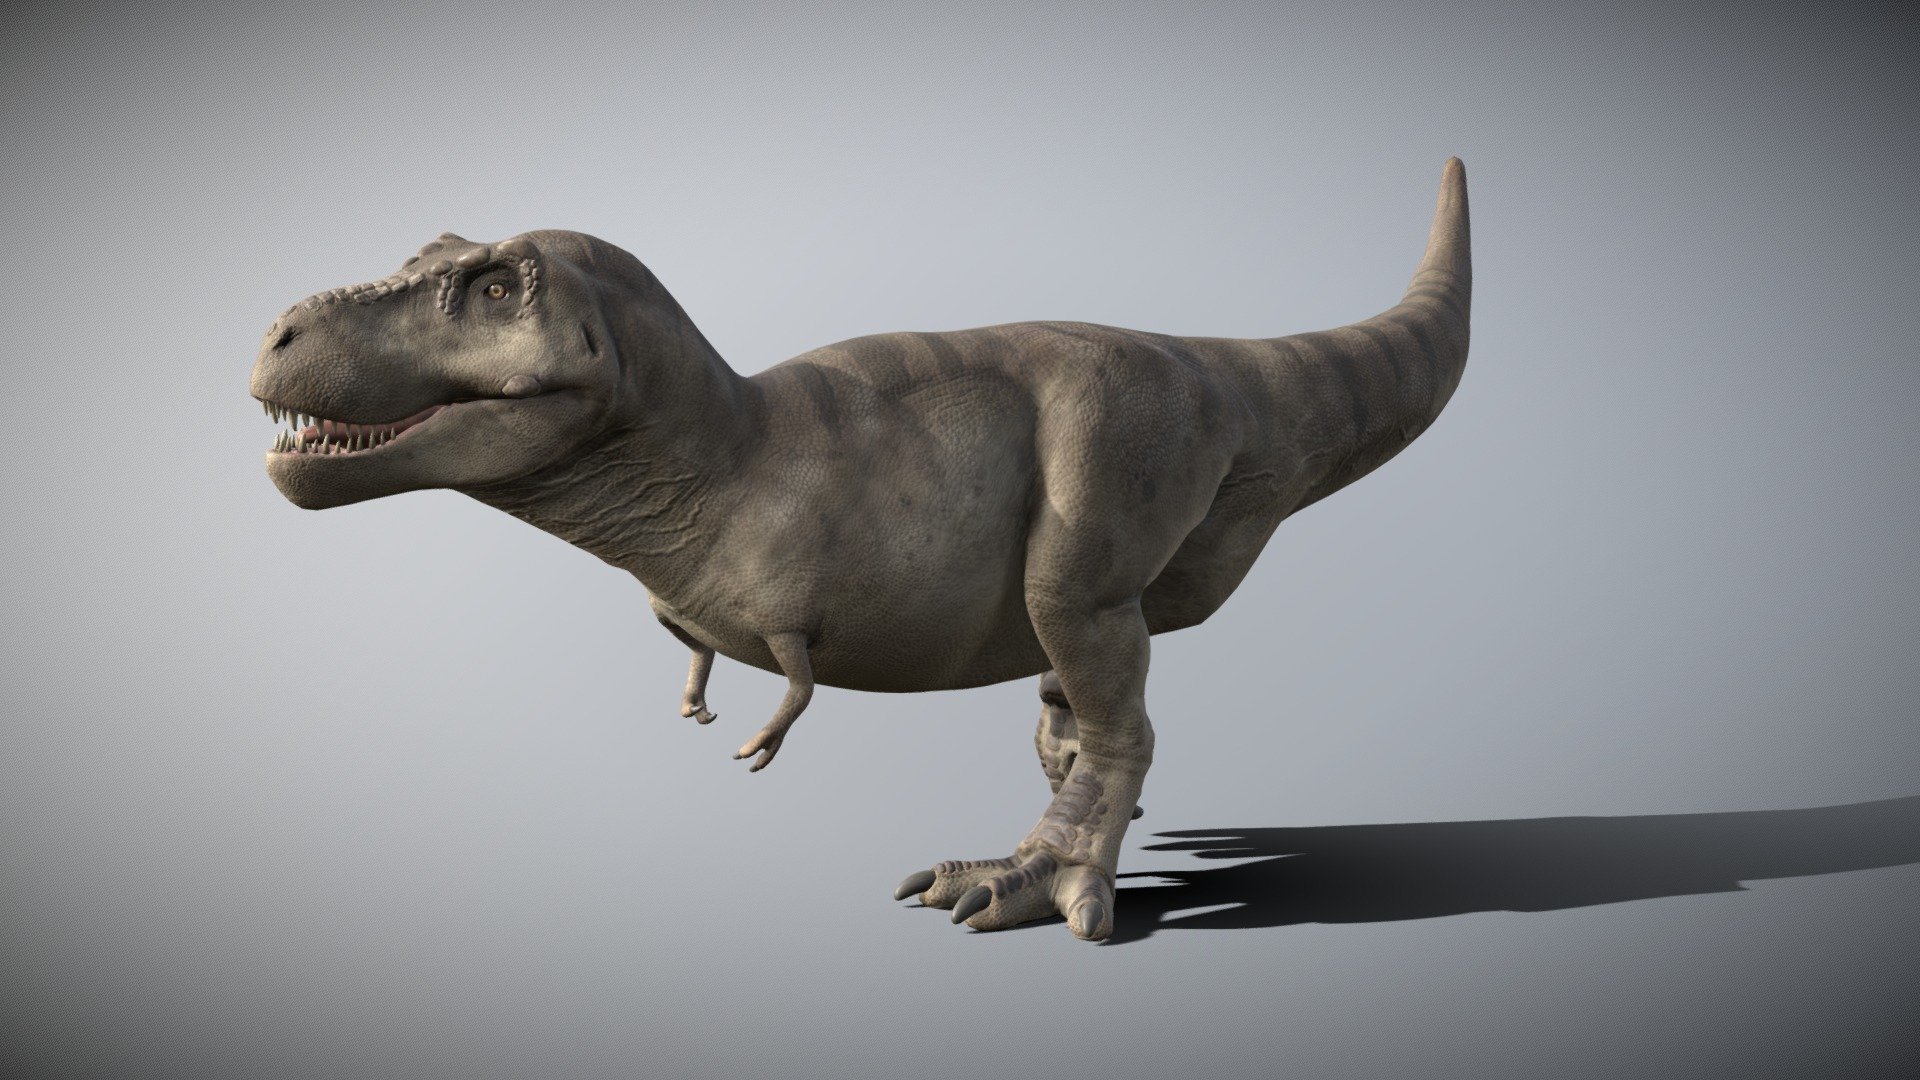 This Trex was sculpted in zbrush, textured in Substance Painter and Photoshop, rigged and animated in blender. 

Textures png 4096x4096.

7 animations: run cycle, walk cycle, walk + roar, walk left, walk right, roar, waiting

Tyrannosaurus is a genus of large theropod dinosaur. The species Tyrannosaurus rex (rex meaning king in Latin), often called T. rex or colloquially T-Rex, is one of the best represented theropods. Tyrannosaurus lived throughout what is now western North America, on what was then an island continent known as Laramidia. Tyrannosaurus had a much wider range than other tyrannosaurids. Fossils are found in a variety of rock formations dating to the Maastrichtian age of the Upper Cretaceous period, 68 to 66 million years ago. It was the last known member of the tyrannosaurids and among the last non-avian dinosaurs to exist before the Cretaceous–Paleogene extinction event 3d model